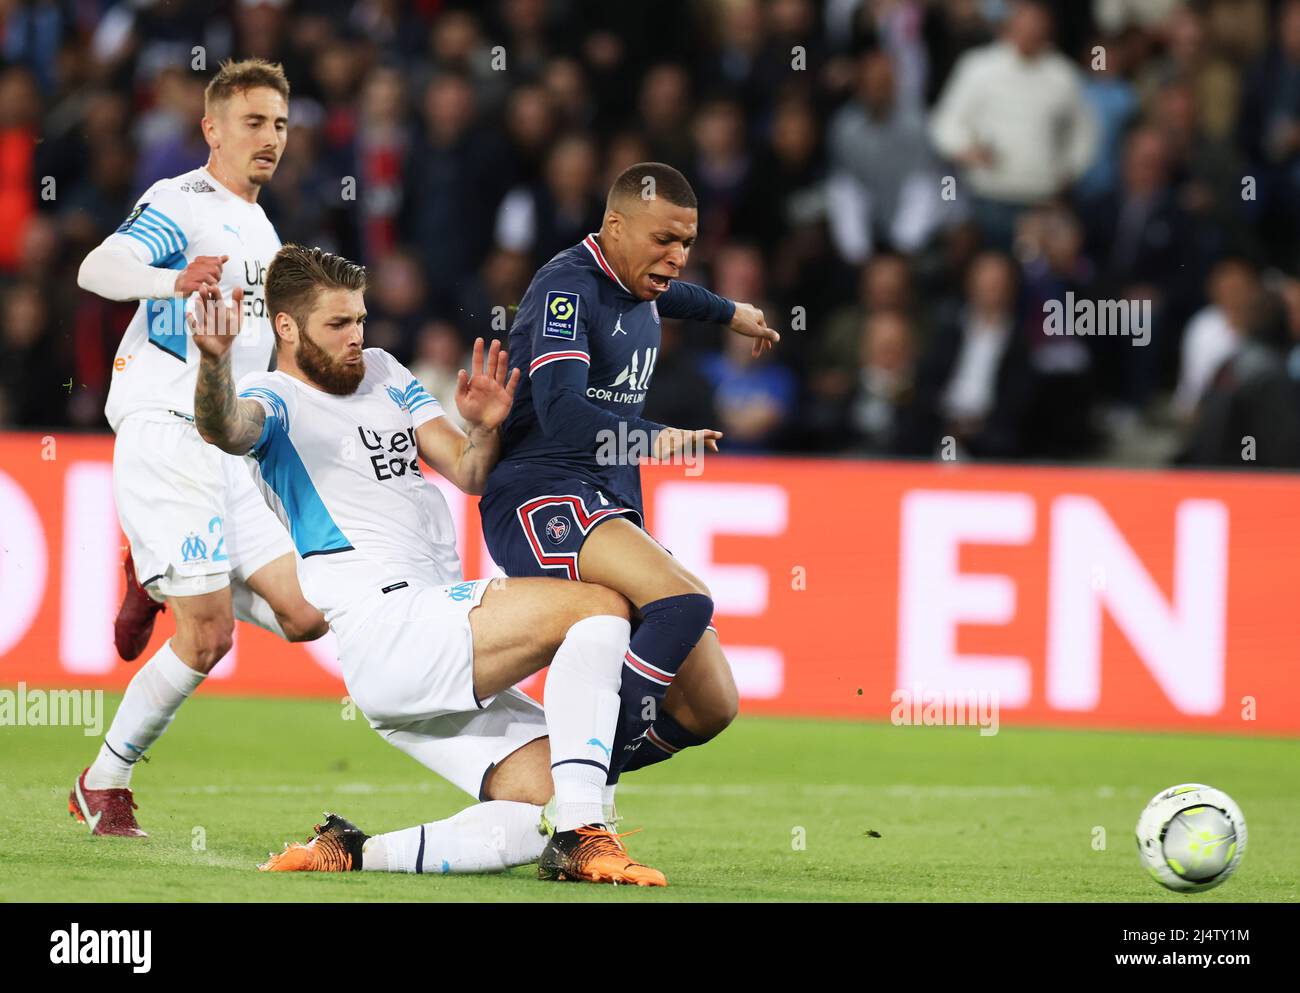 Paris, France. 17th Apr, 2022. Paris Saint Germain's Kylian Mbappe (R) vies with Marseille's Duje Caleta-Car (C) during a French Ligue 1 football match between Paris Saint Germain (PSG) and Marseille in Paris, France, April 17, 2022. Credit: Gao Jing/Xinhua/Alamy Live News Stock Photo